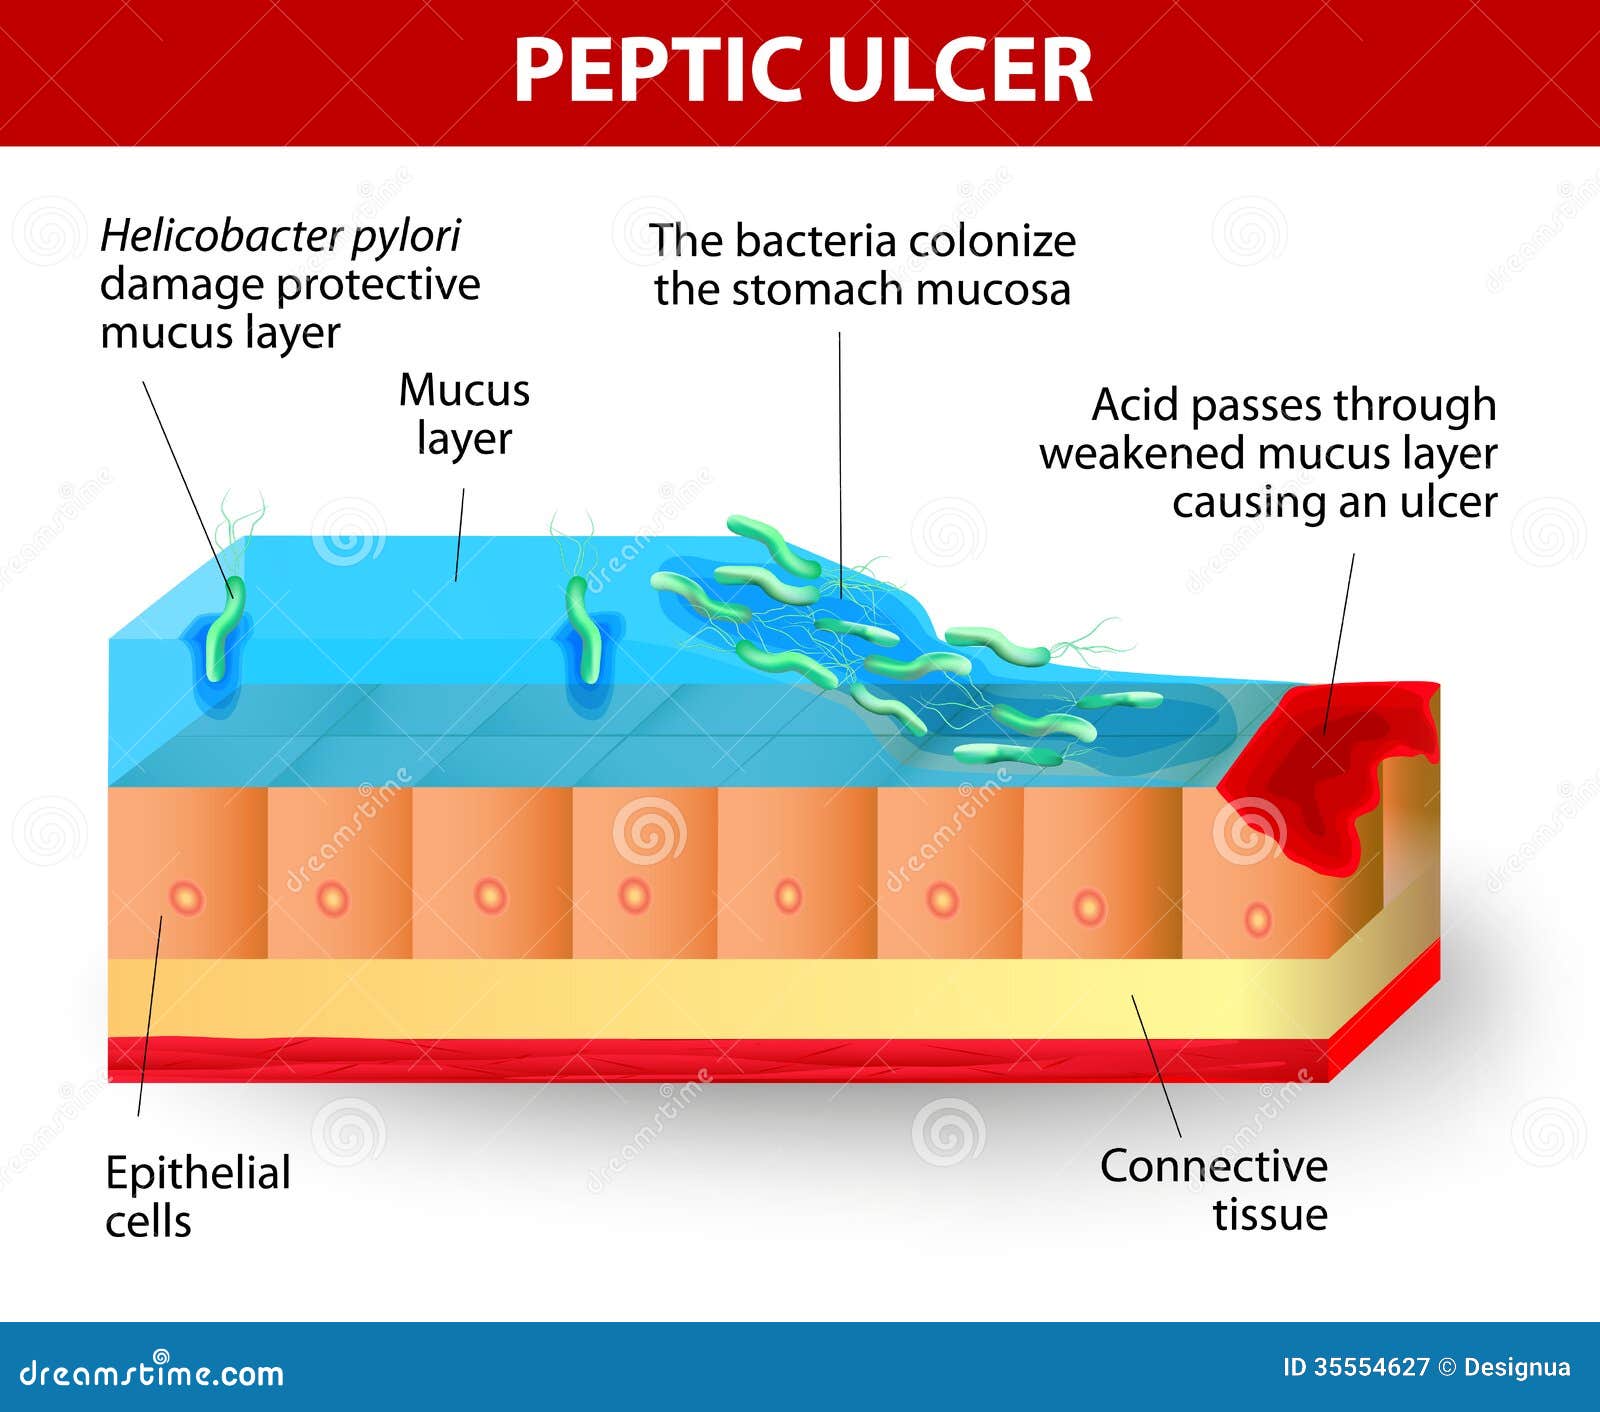 helicobacter pylori and ulcers disease